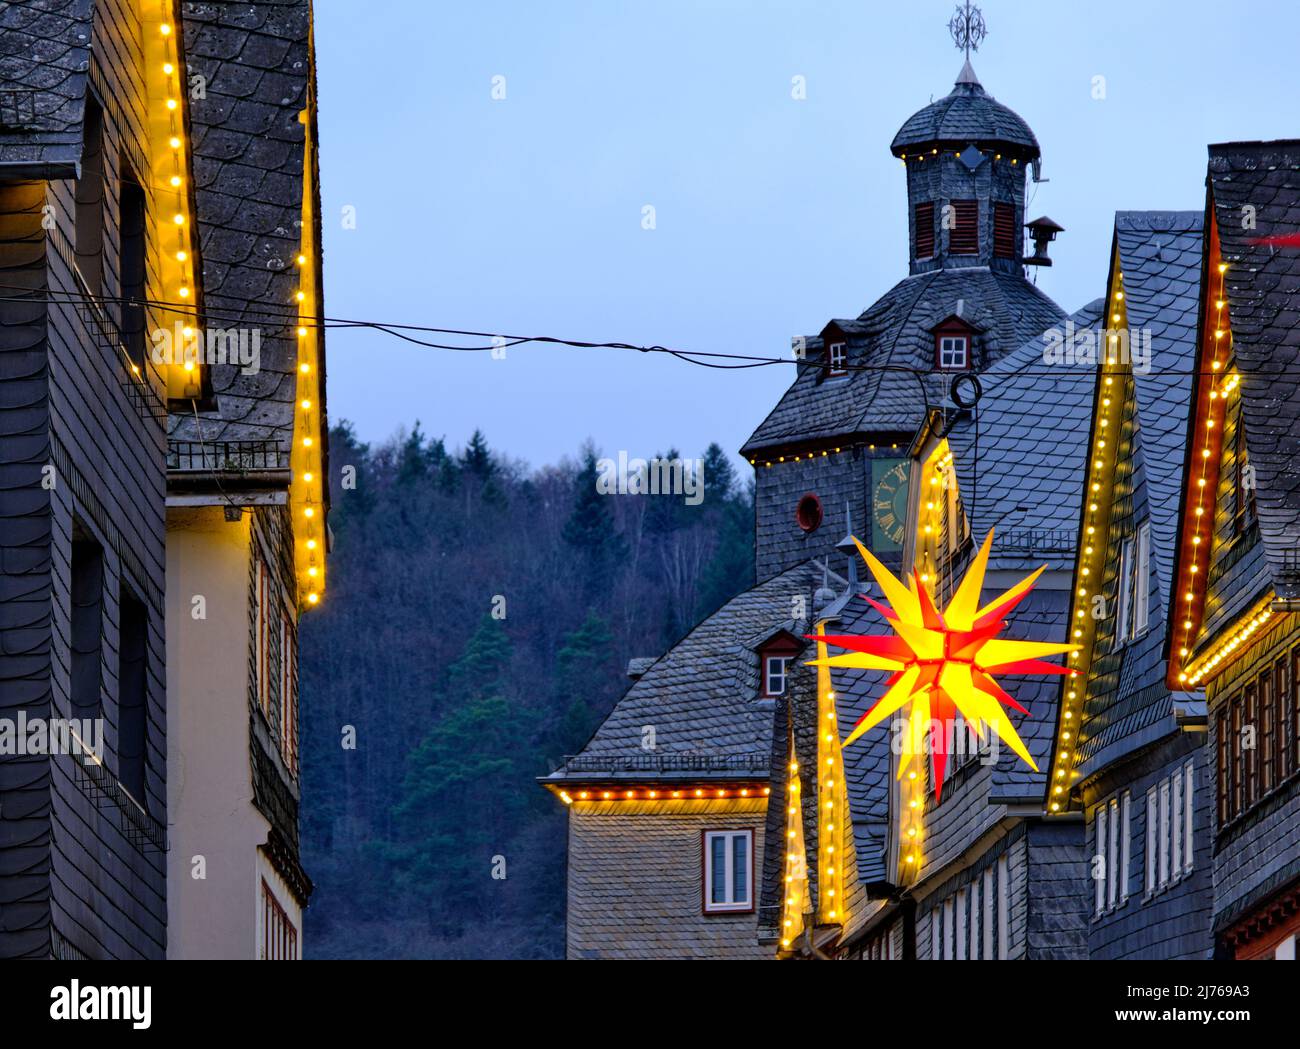 Europe, Germany, Hesse, city of Herborn, historic old town, Christmas, Christmas lights, historic house gables in the main street, town hall, poinsettia Stock Photo